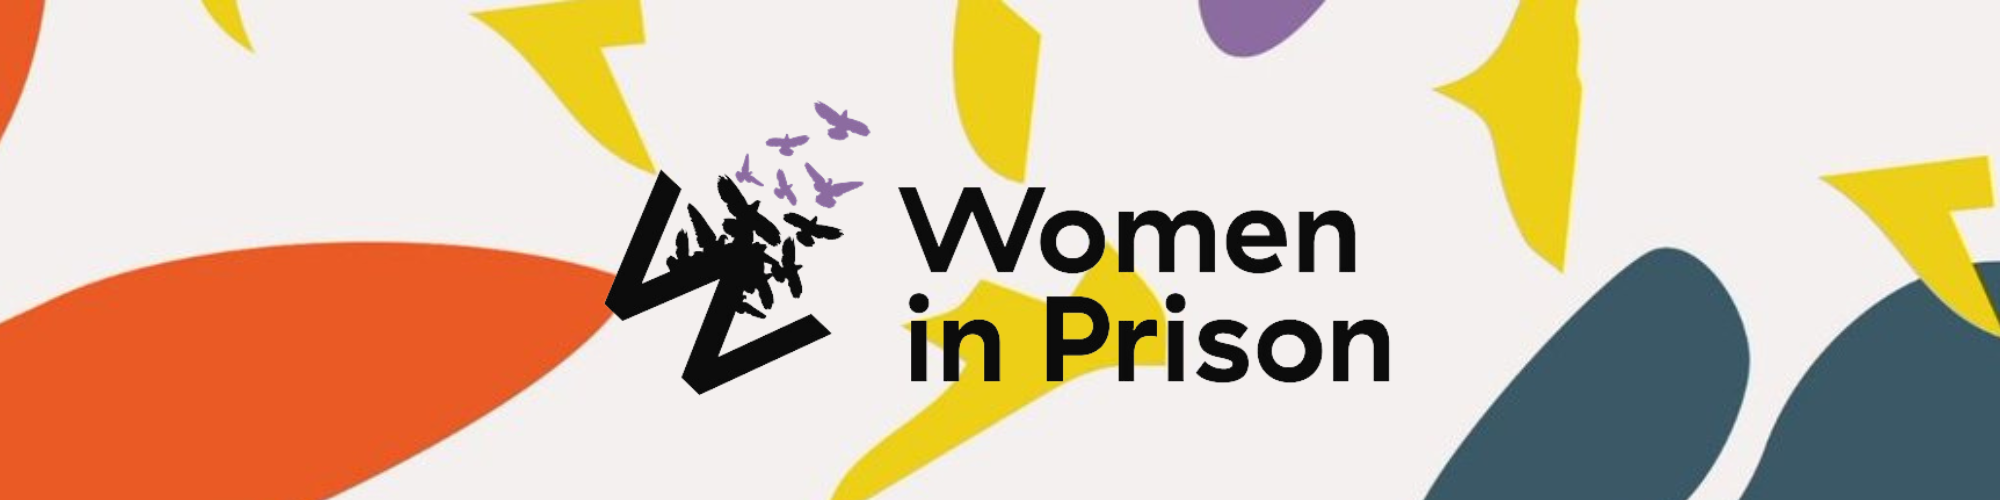 Women in Prison landing page banner (2000 × 500px)